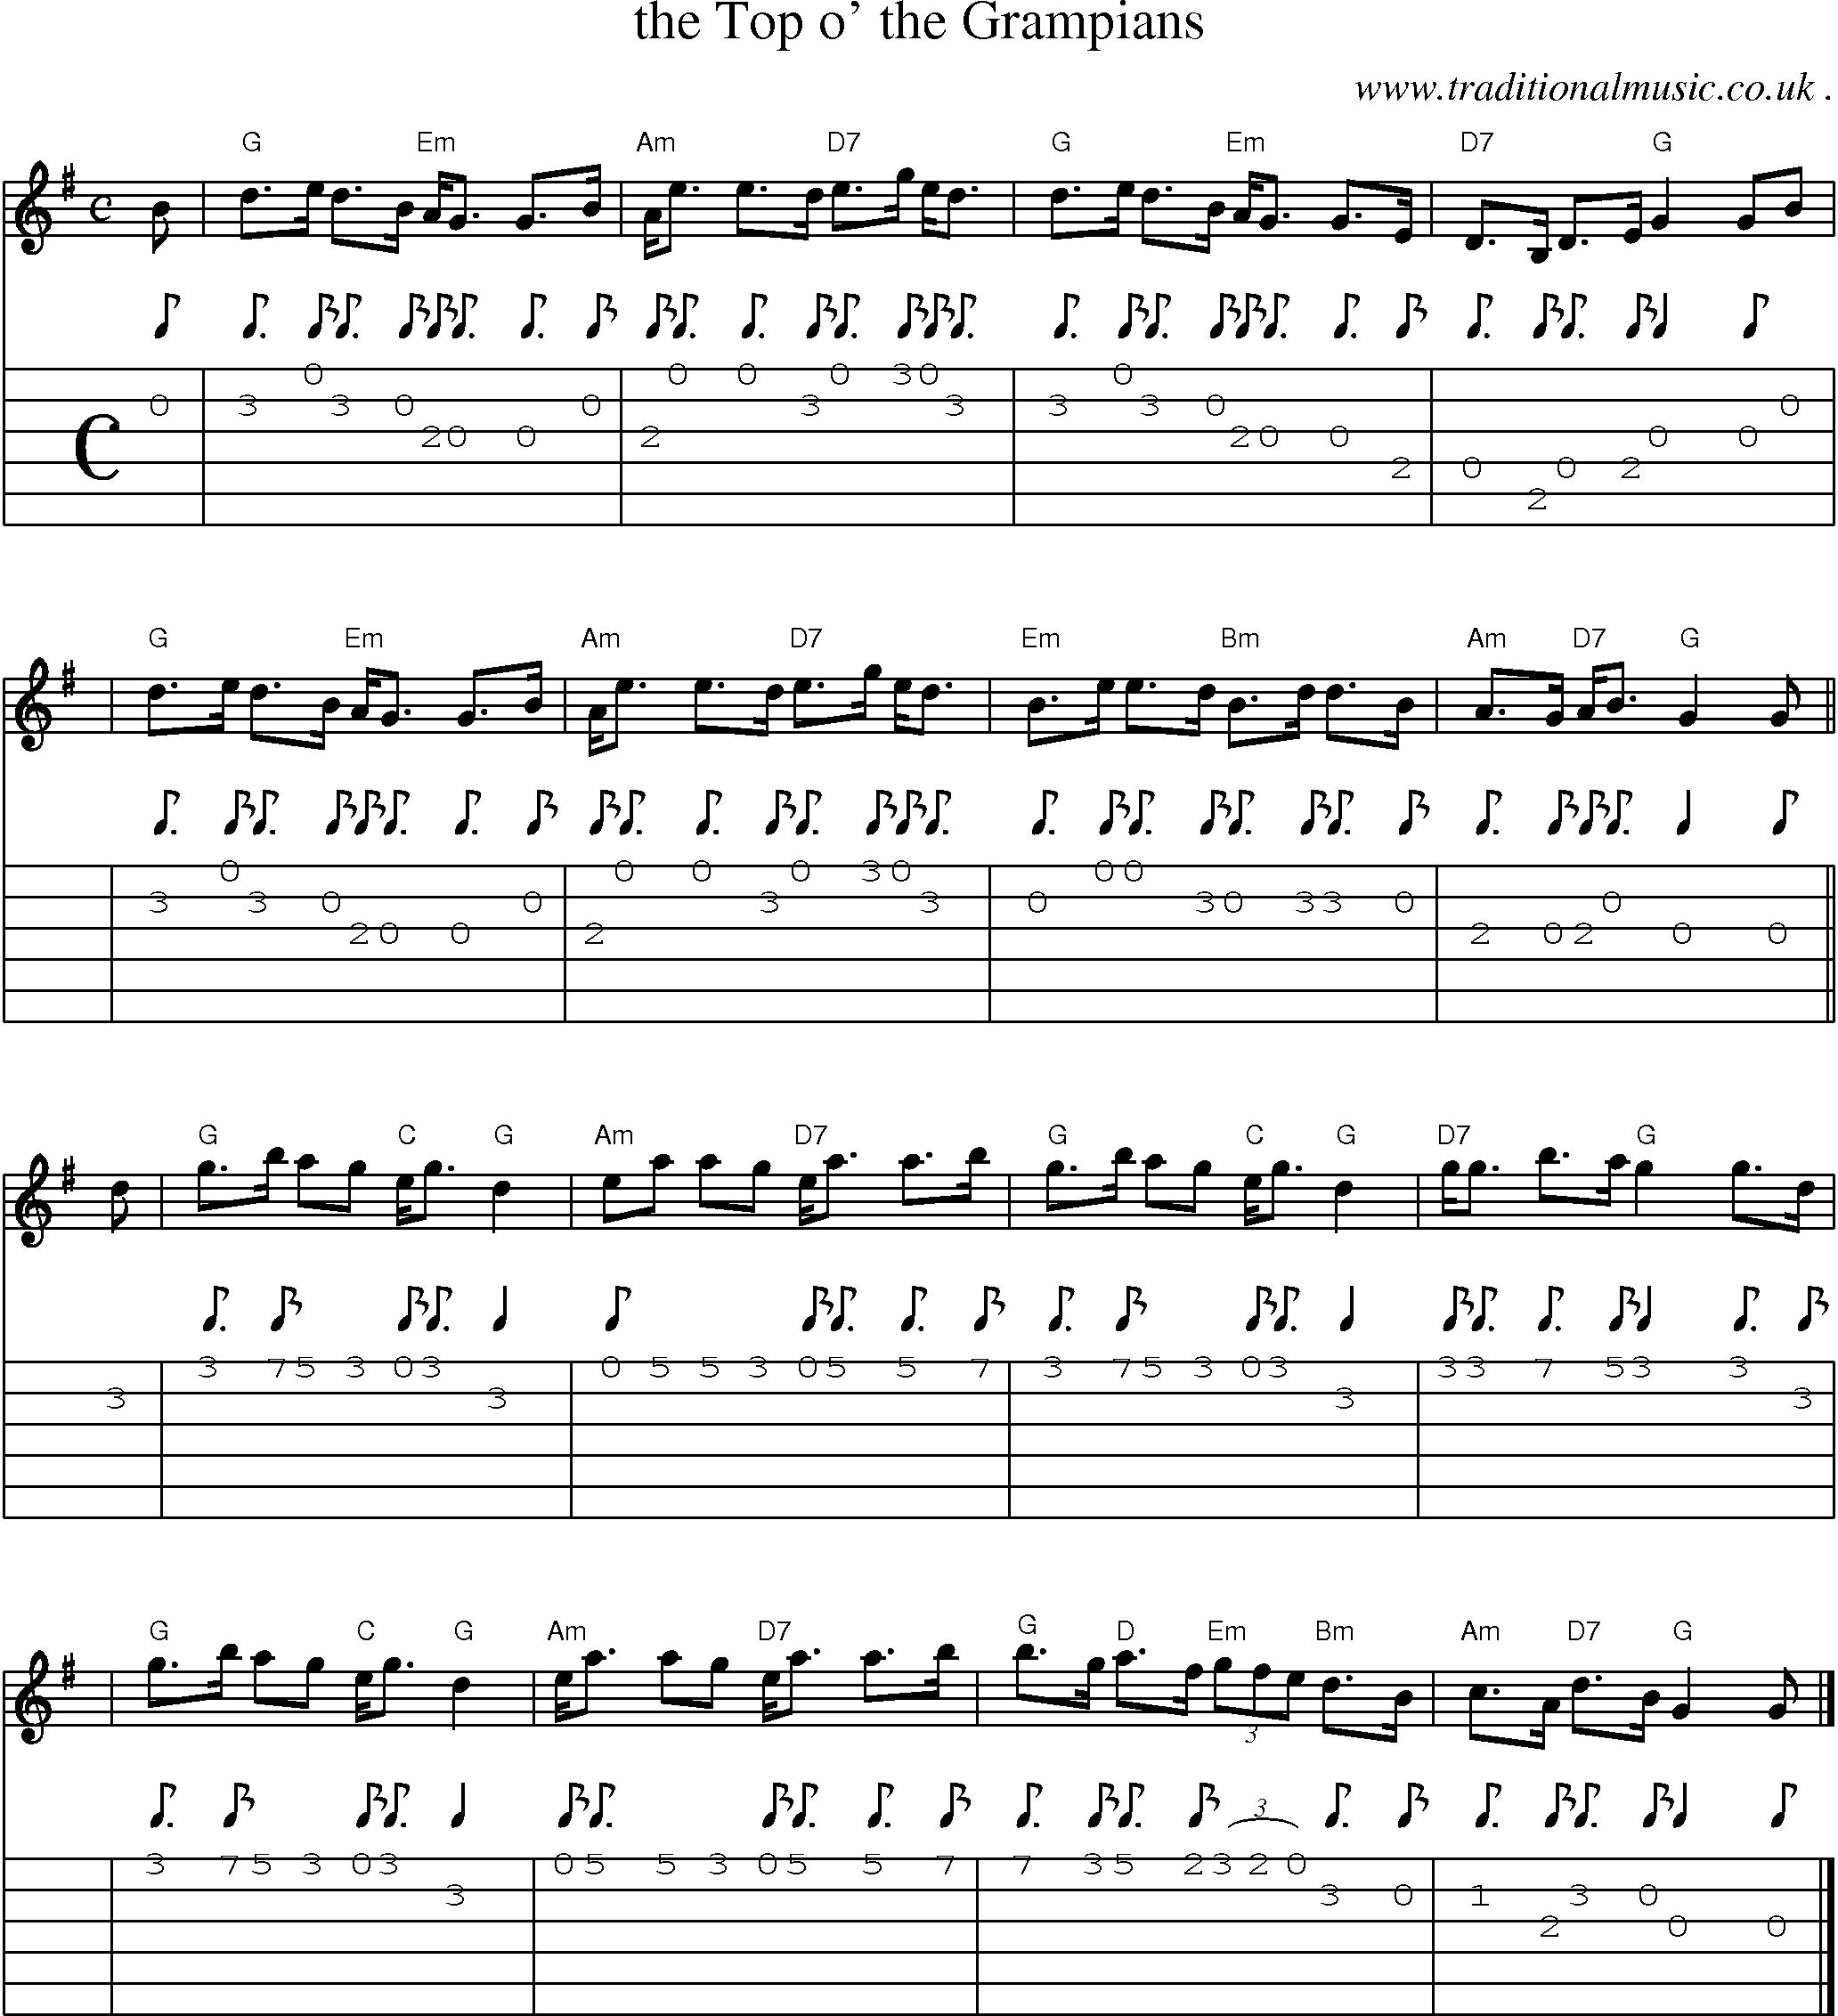 Sheet-music  score, Chords and Guitar Tabs for The Top O The Grampians